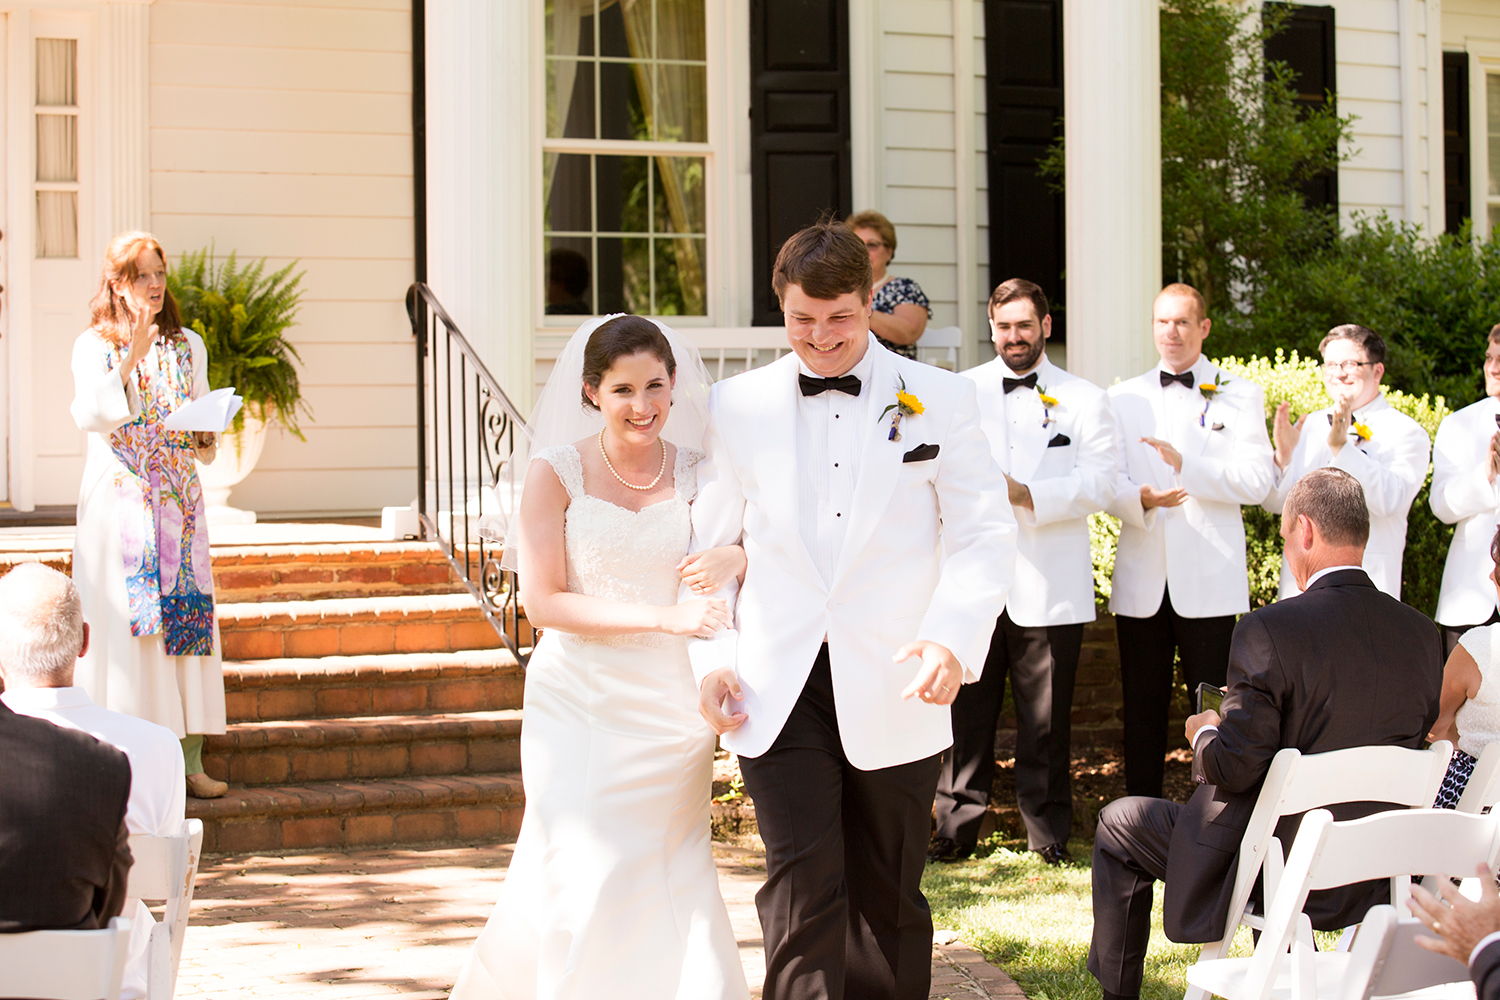 Summer Wedding at The Virginia Cliffe Inn - Image Property of www.j-dphoto.com